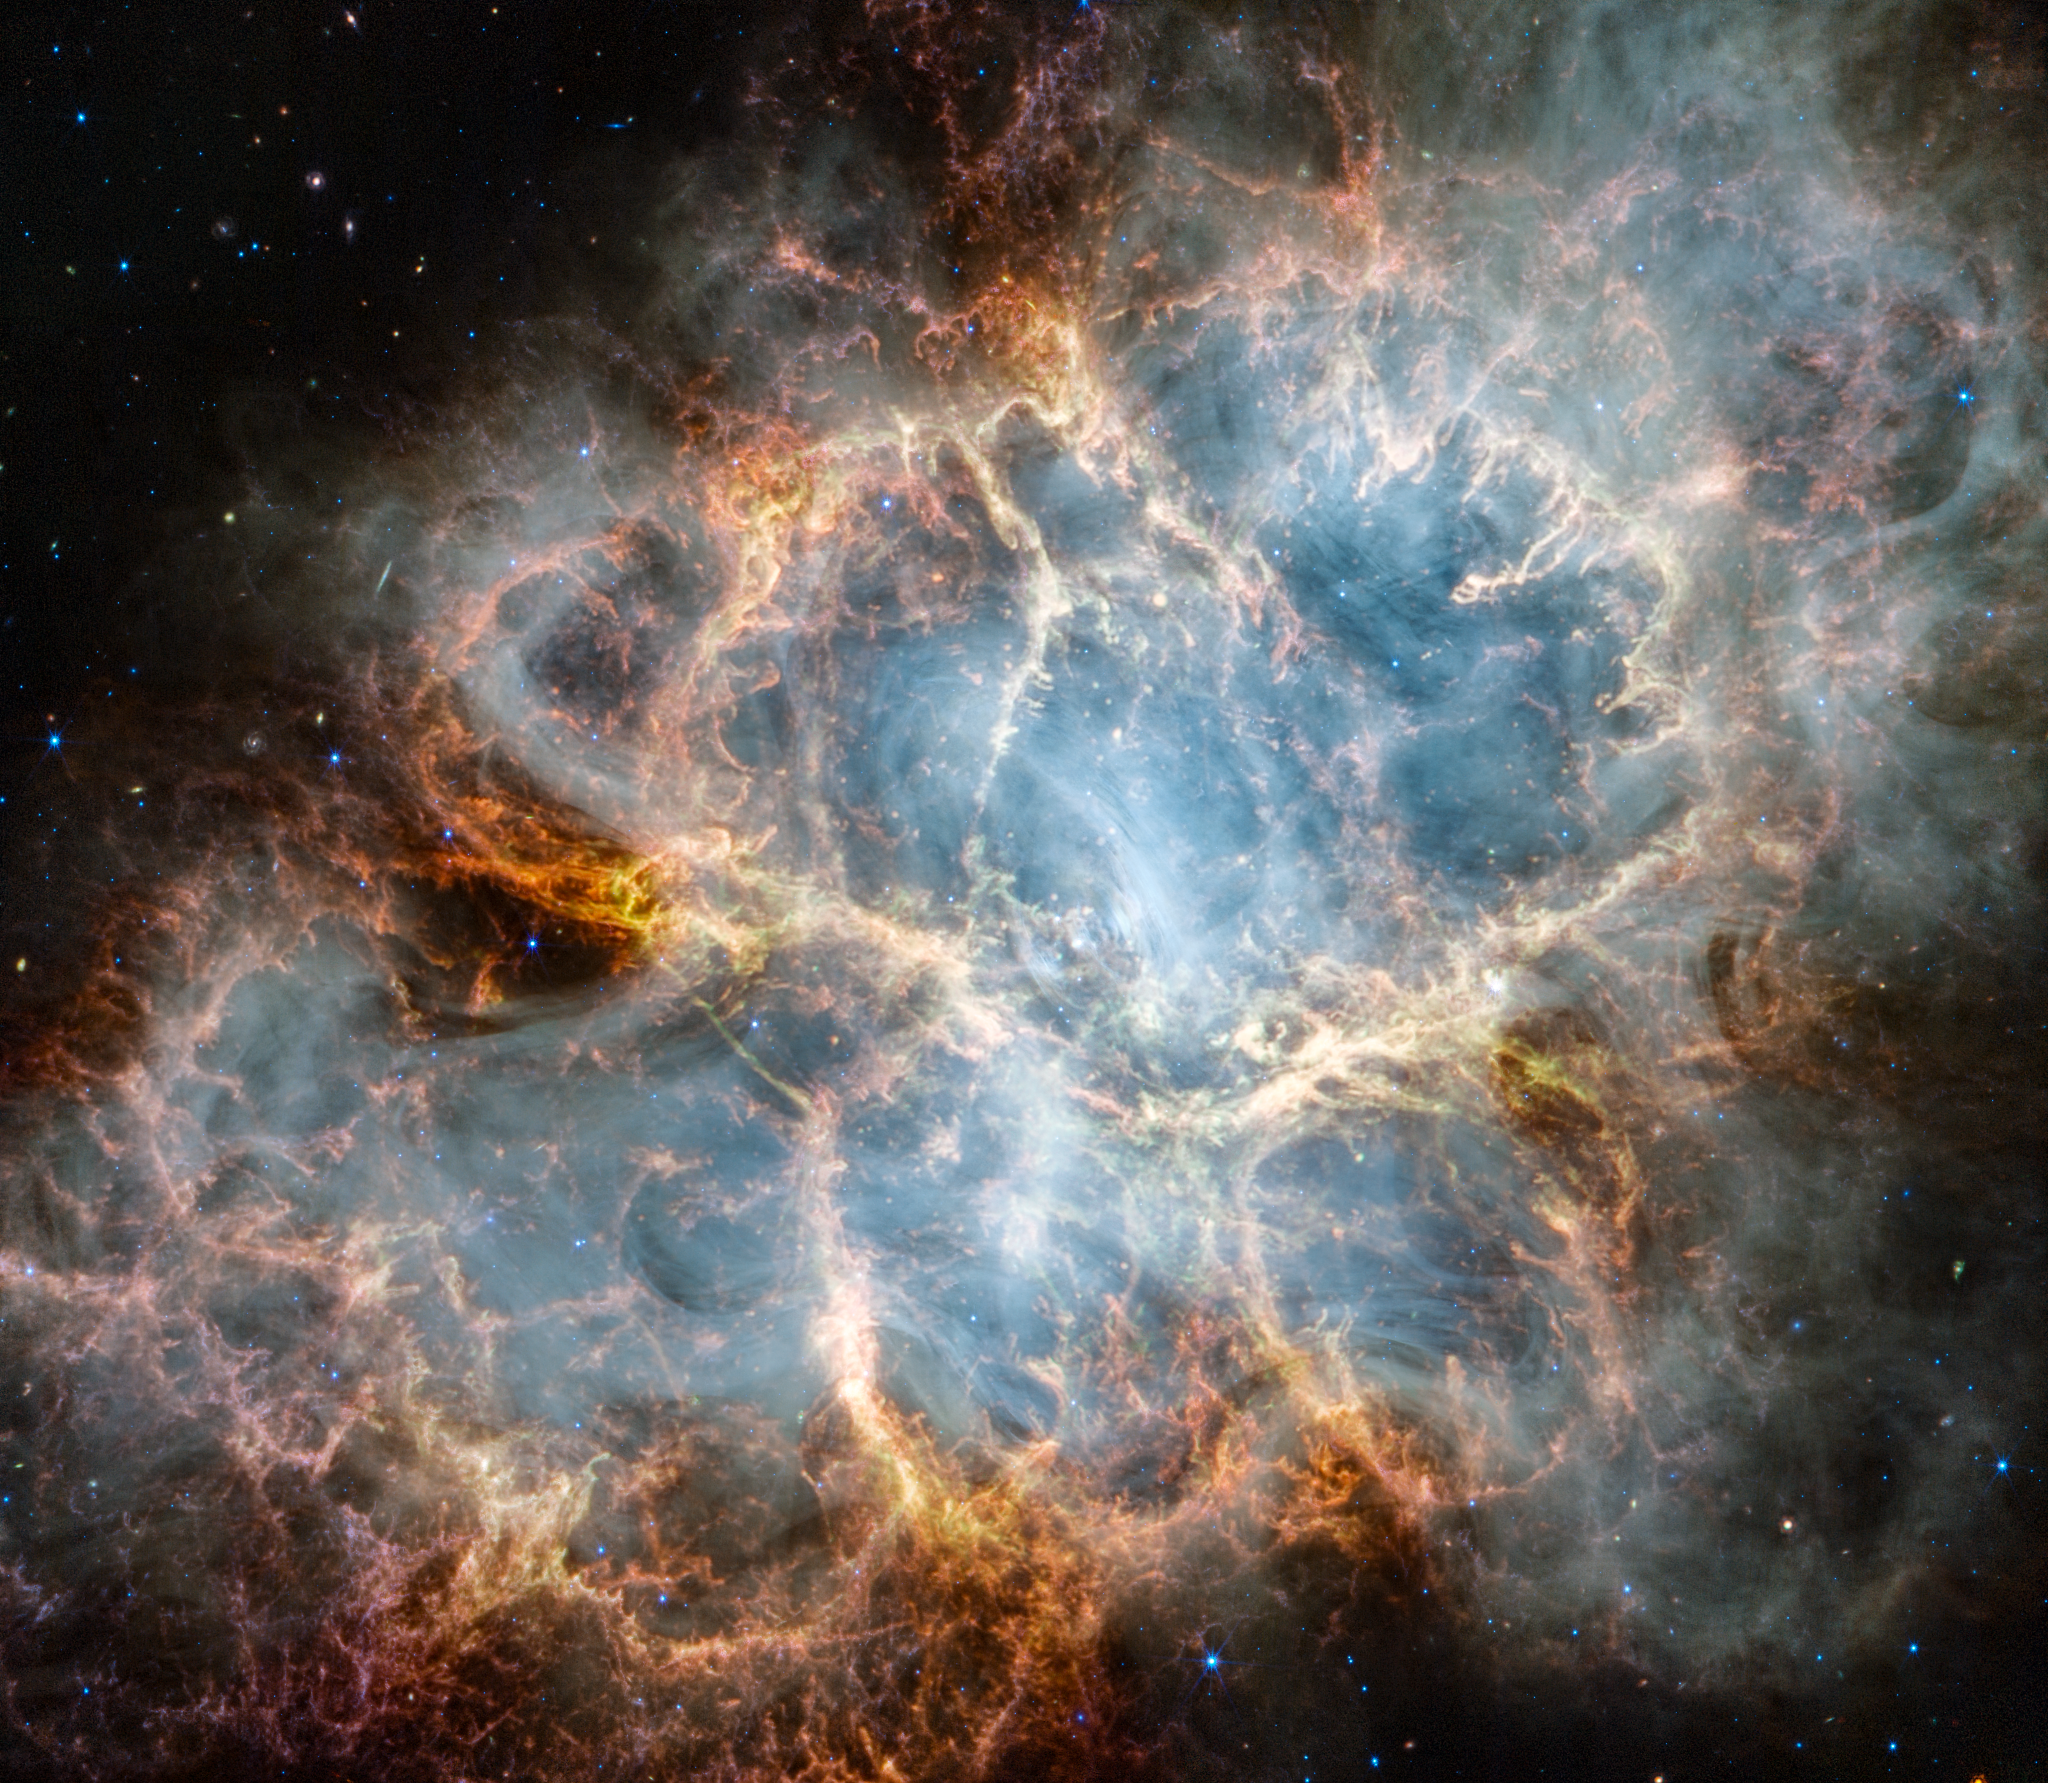 The Crab Nebula is an oval nebula with complex structure against a black background. On the nebula’s exterior, particularly at the top left and bottom left, lie curtains of glowing red and orange fluffy material. Its interior shell shows large-scale loops of mottled filaments of yellow-white and green, studded with clumps and knots. Translucent thin ribbons of smoky white lie within the remnant’s interior, brightest toward its center. The white material follows different directions throughout, including sometimes sharply curving away from certain regions within the remnant. A faint, wispy ring of white material encircles the very center of the nebula. Around and within the supernova remnant are many points of blue, red, and yellow light.